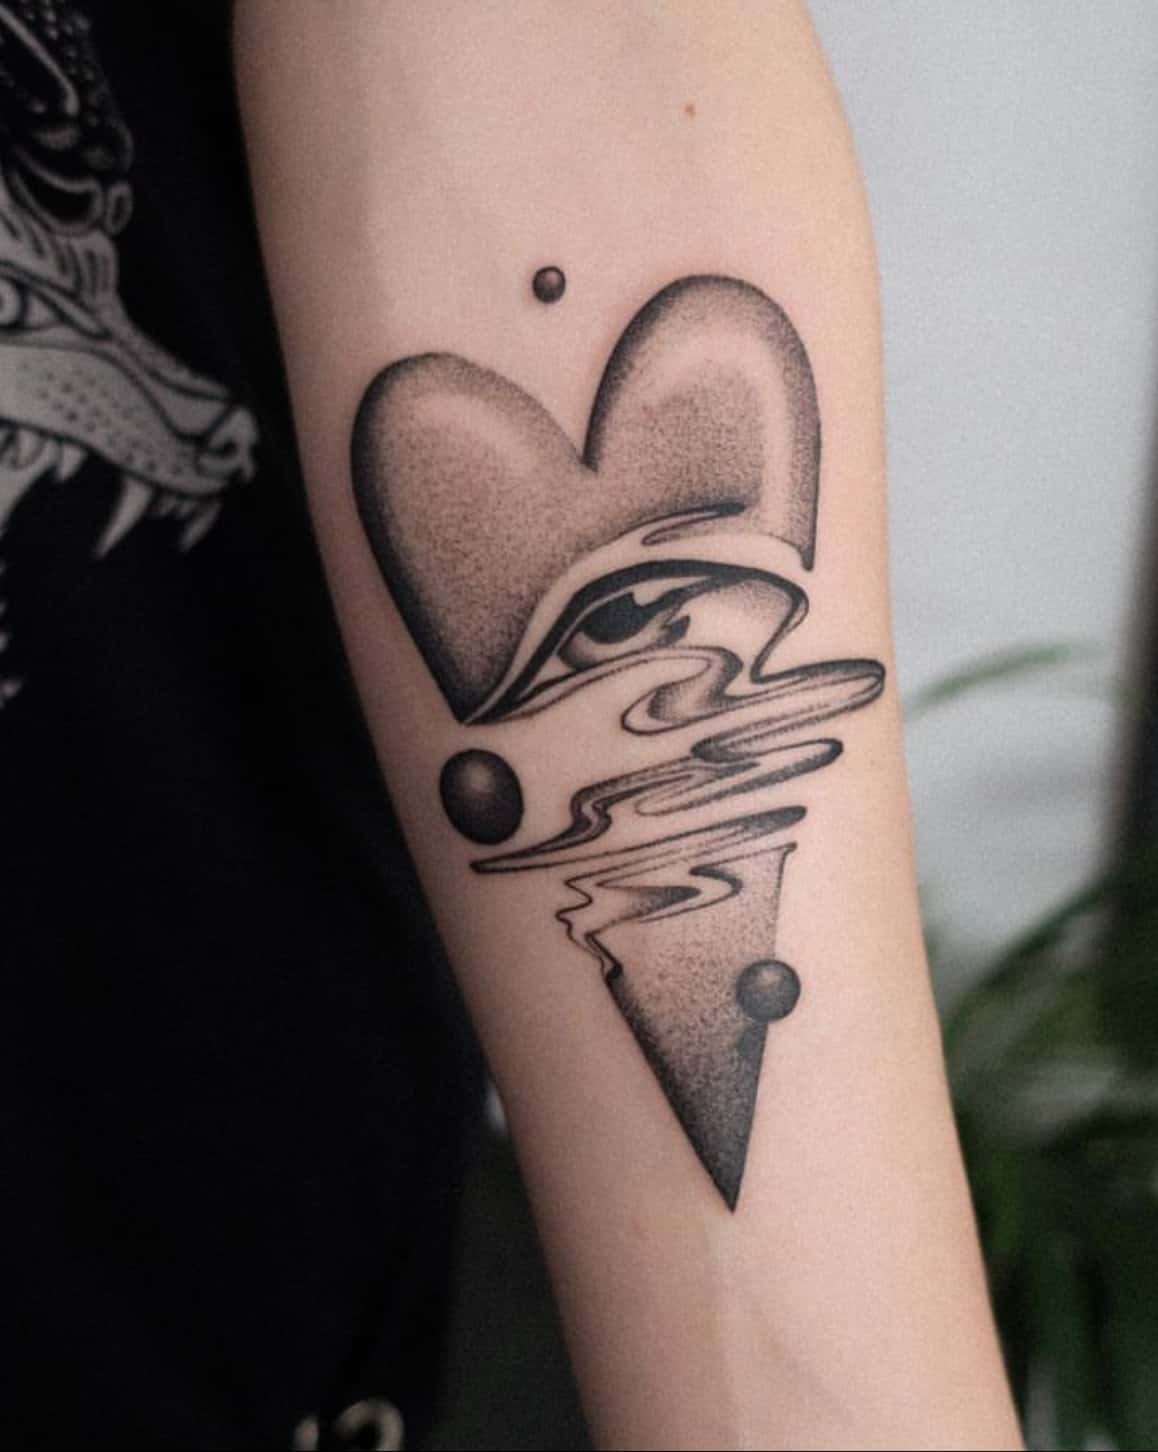 15 Sweet Tiny Heart Tattoos That We Just Can't Get Enough Of | CafeMom.com